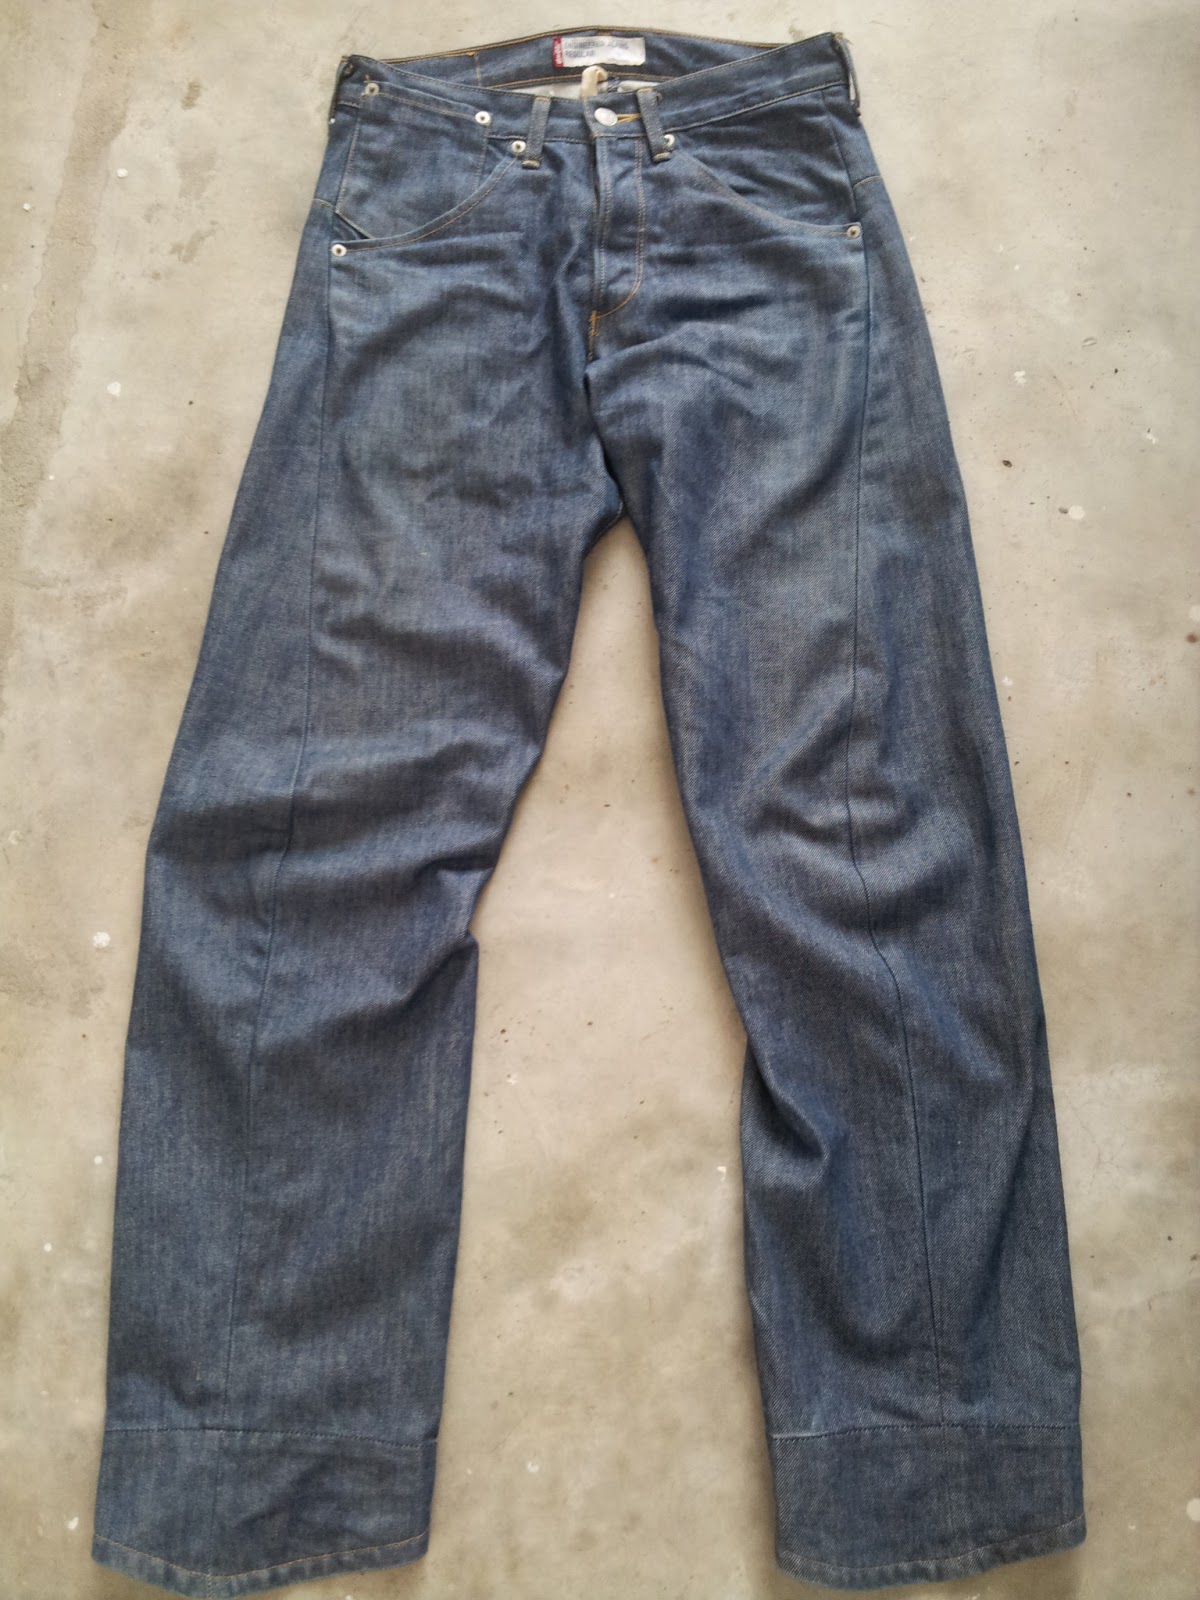 pArT tiMe bUnDLe: Levi's Engineered Jeans (SOLD)